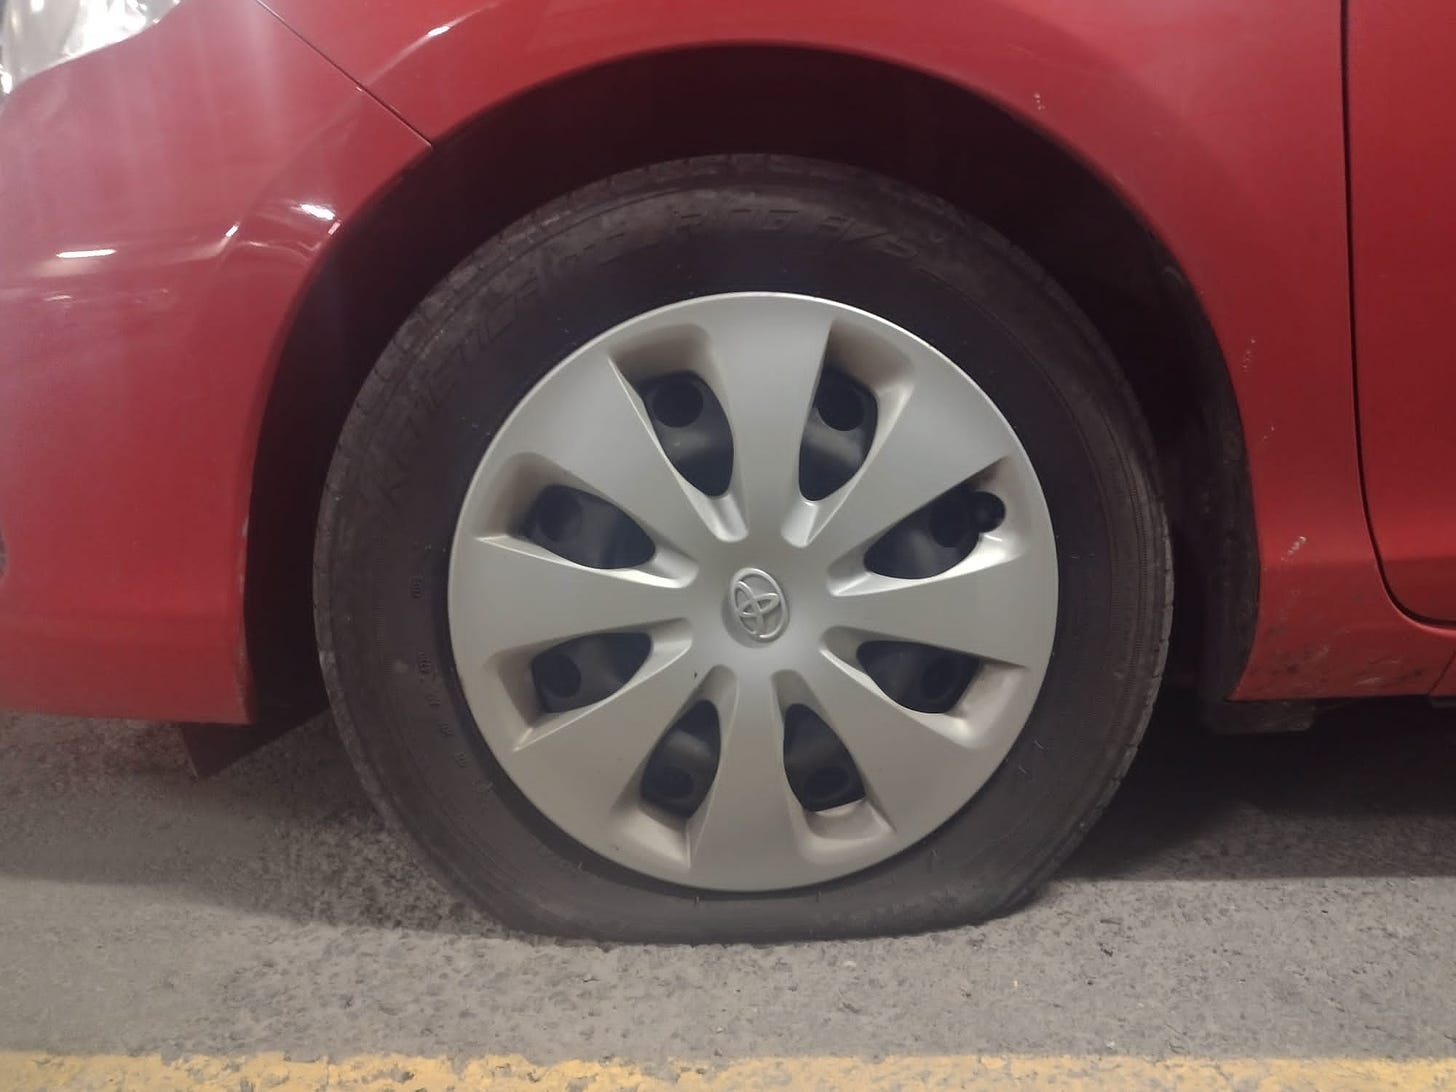 A flat tire on my friend’s red Prius